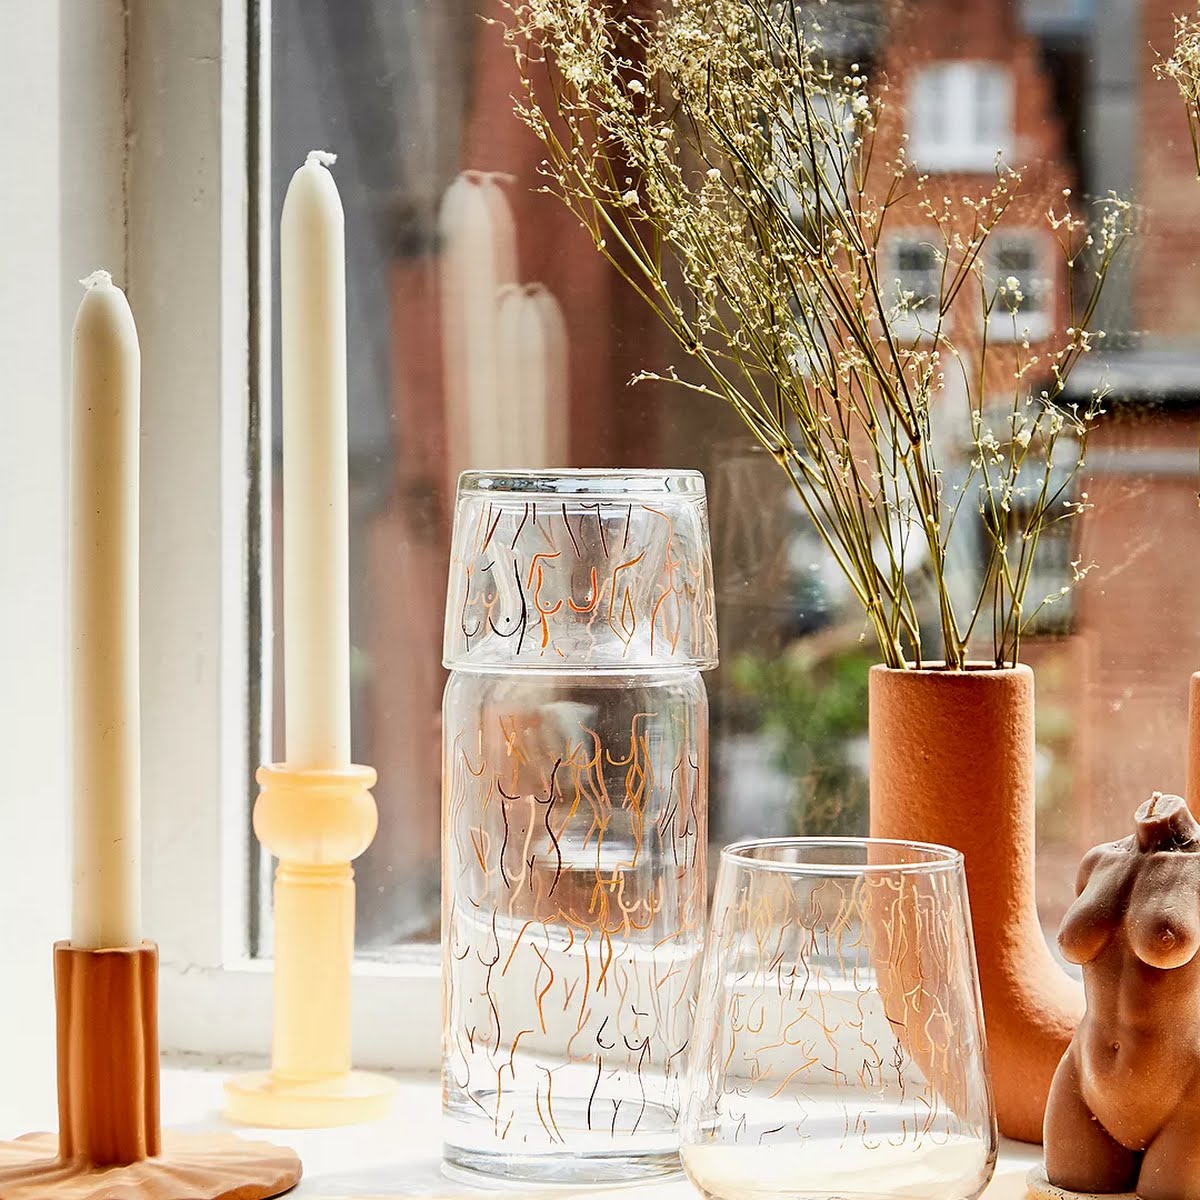 Stay Hydrated Thanks to These Modern Carafe and Cup Sets